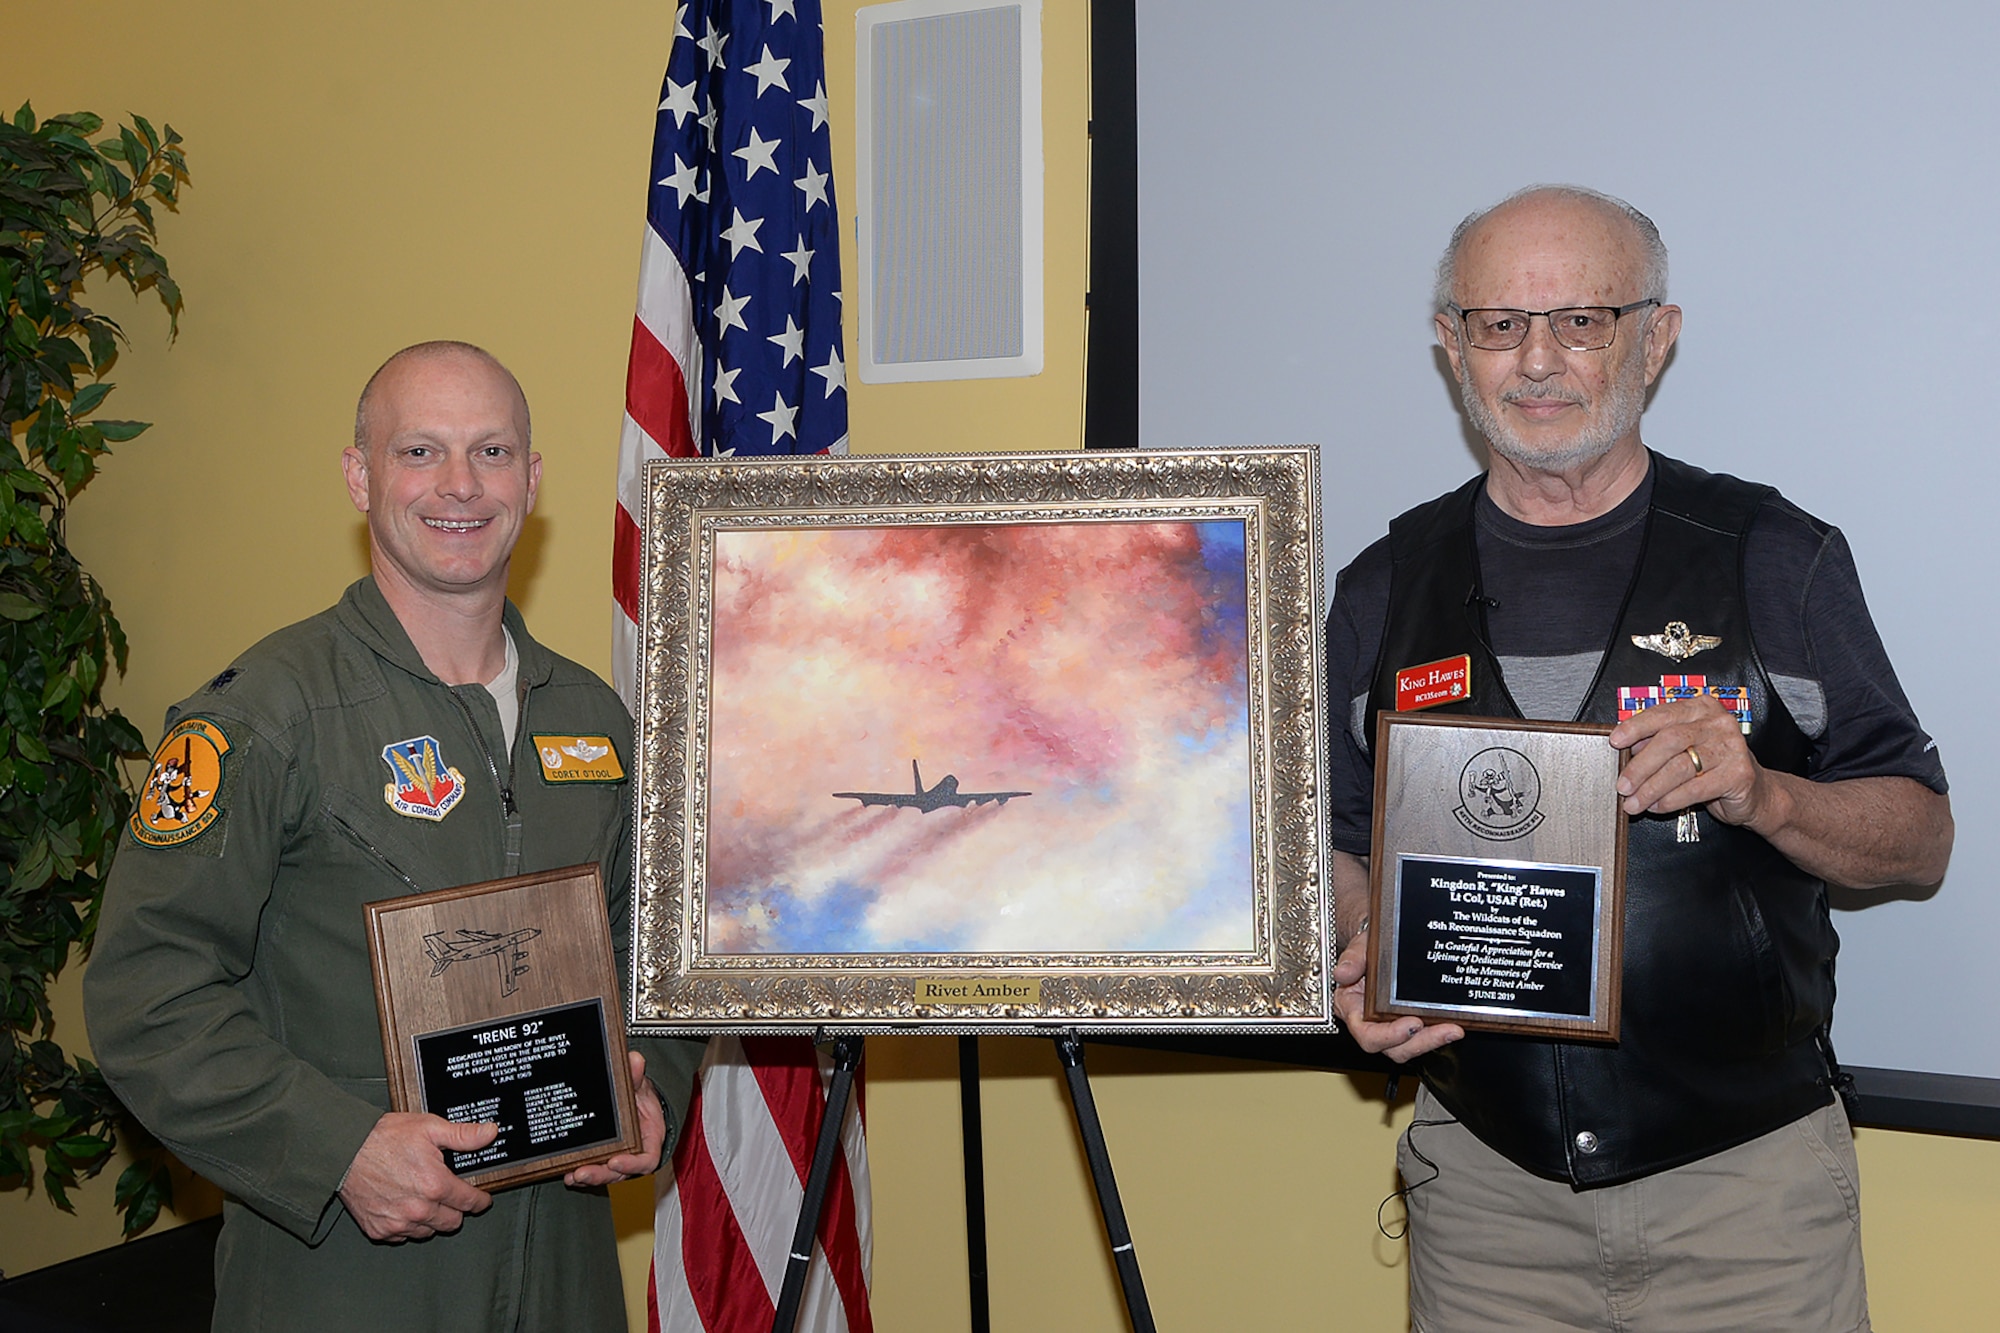 Lt. Col. Corey O'Tool, 45th Reconnaissance Squadron commander and retired Lt. Col. Kingdon Hawes, acting 45th RS squadron commander the day Rivet Amber disappeared, pose in front of a painting of Rivet Amber at Offutt Air Force Base, Neb., June 5, 2019. Rivet Amber was a one of a kind RC-135 outfitted with reconnaissance equipment that disappeared with 19 aircrew members onboard over the Bearing Sea June 5, 1969.